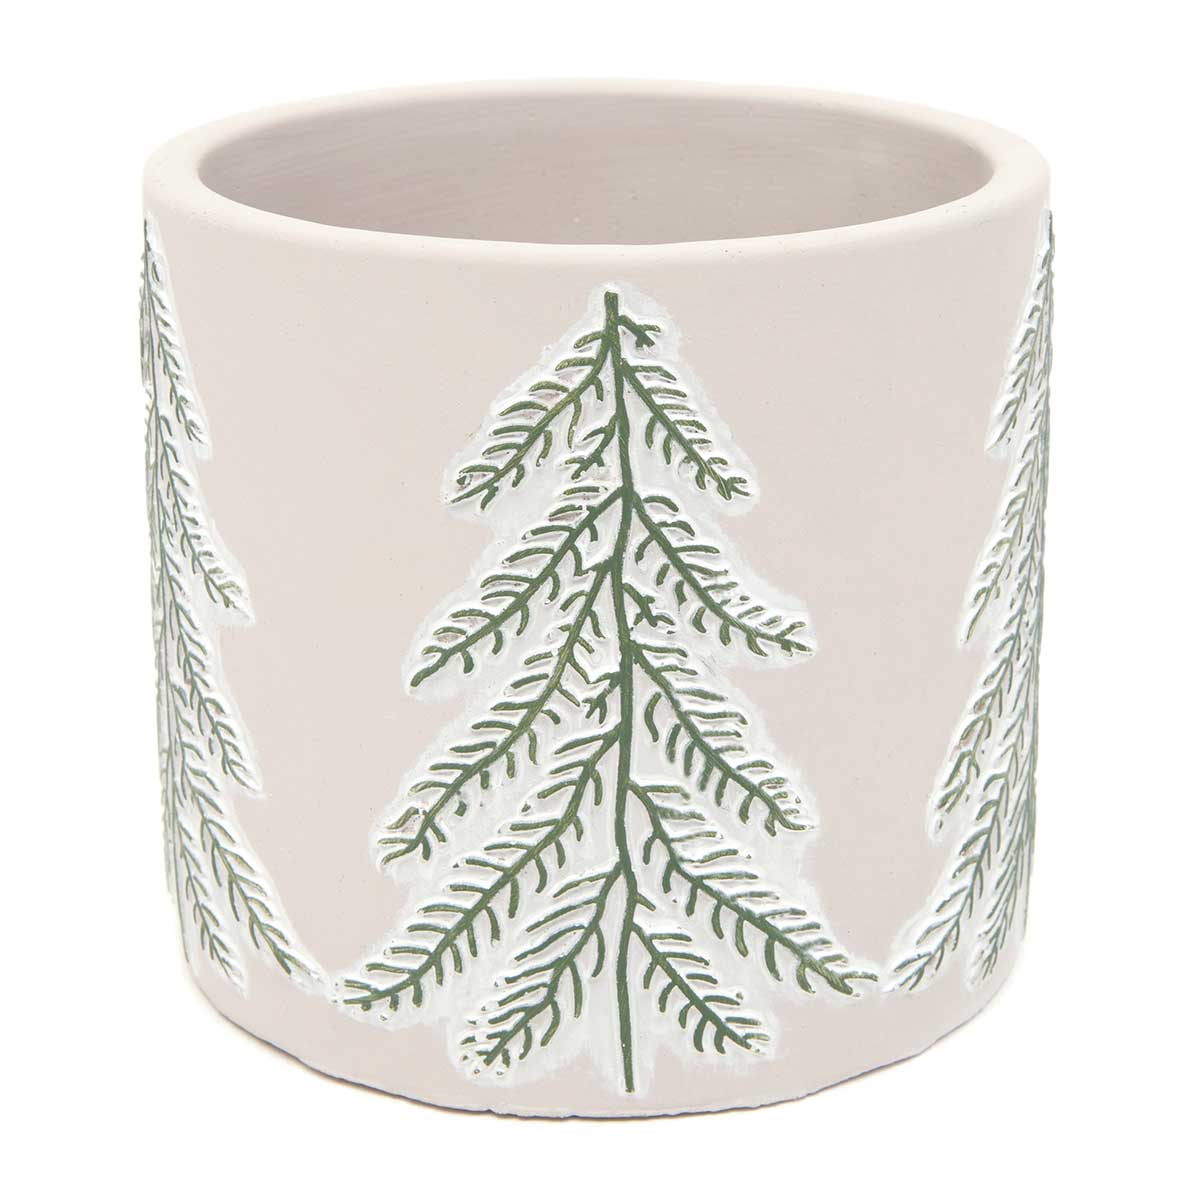 POT WINTER GREEN TREE LARGE 5.75IN X 5IN CREAM/GREEN - Click Image to Close